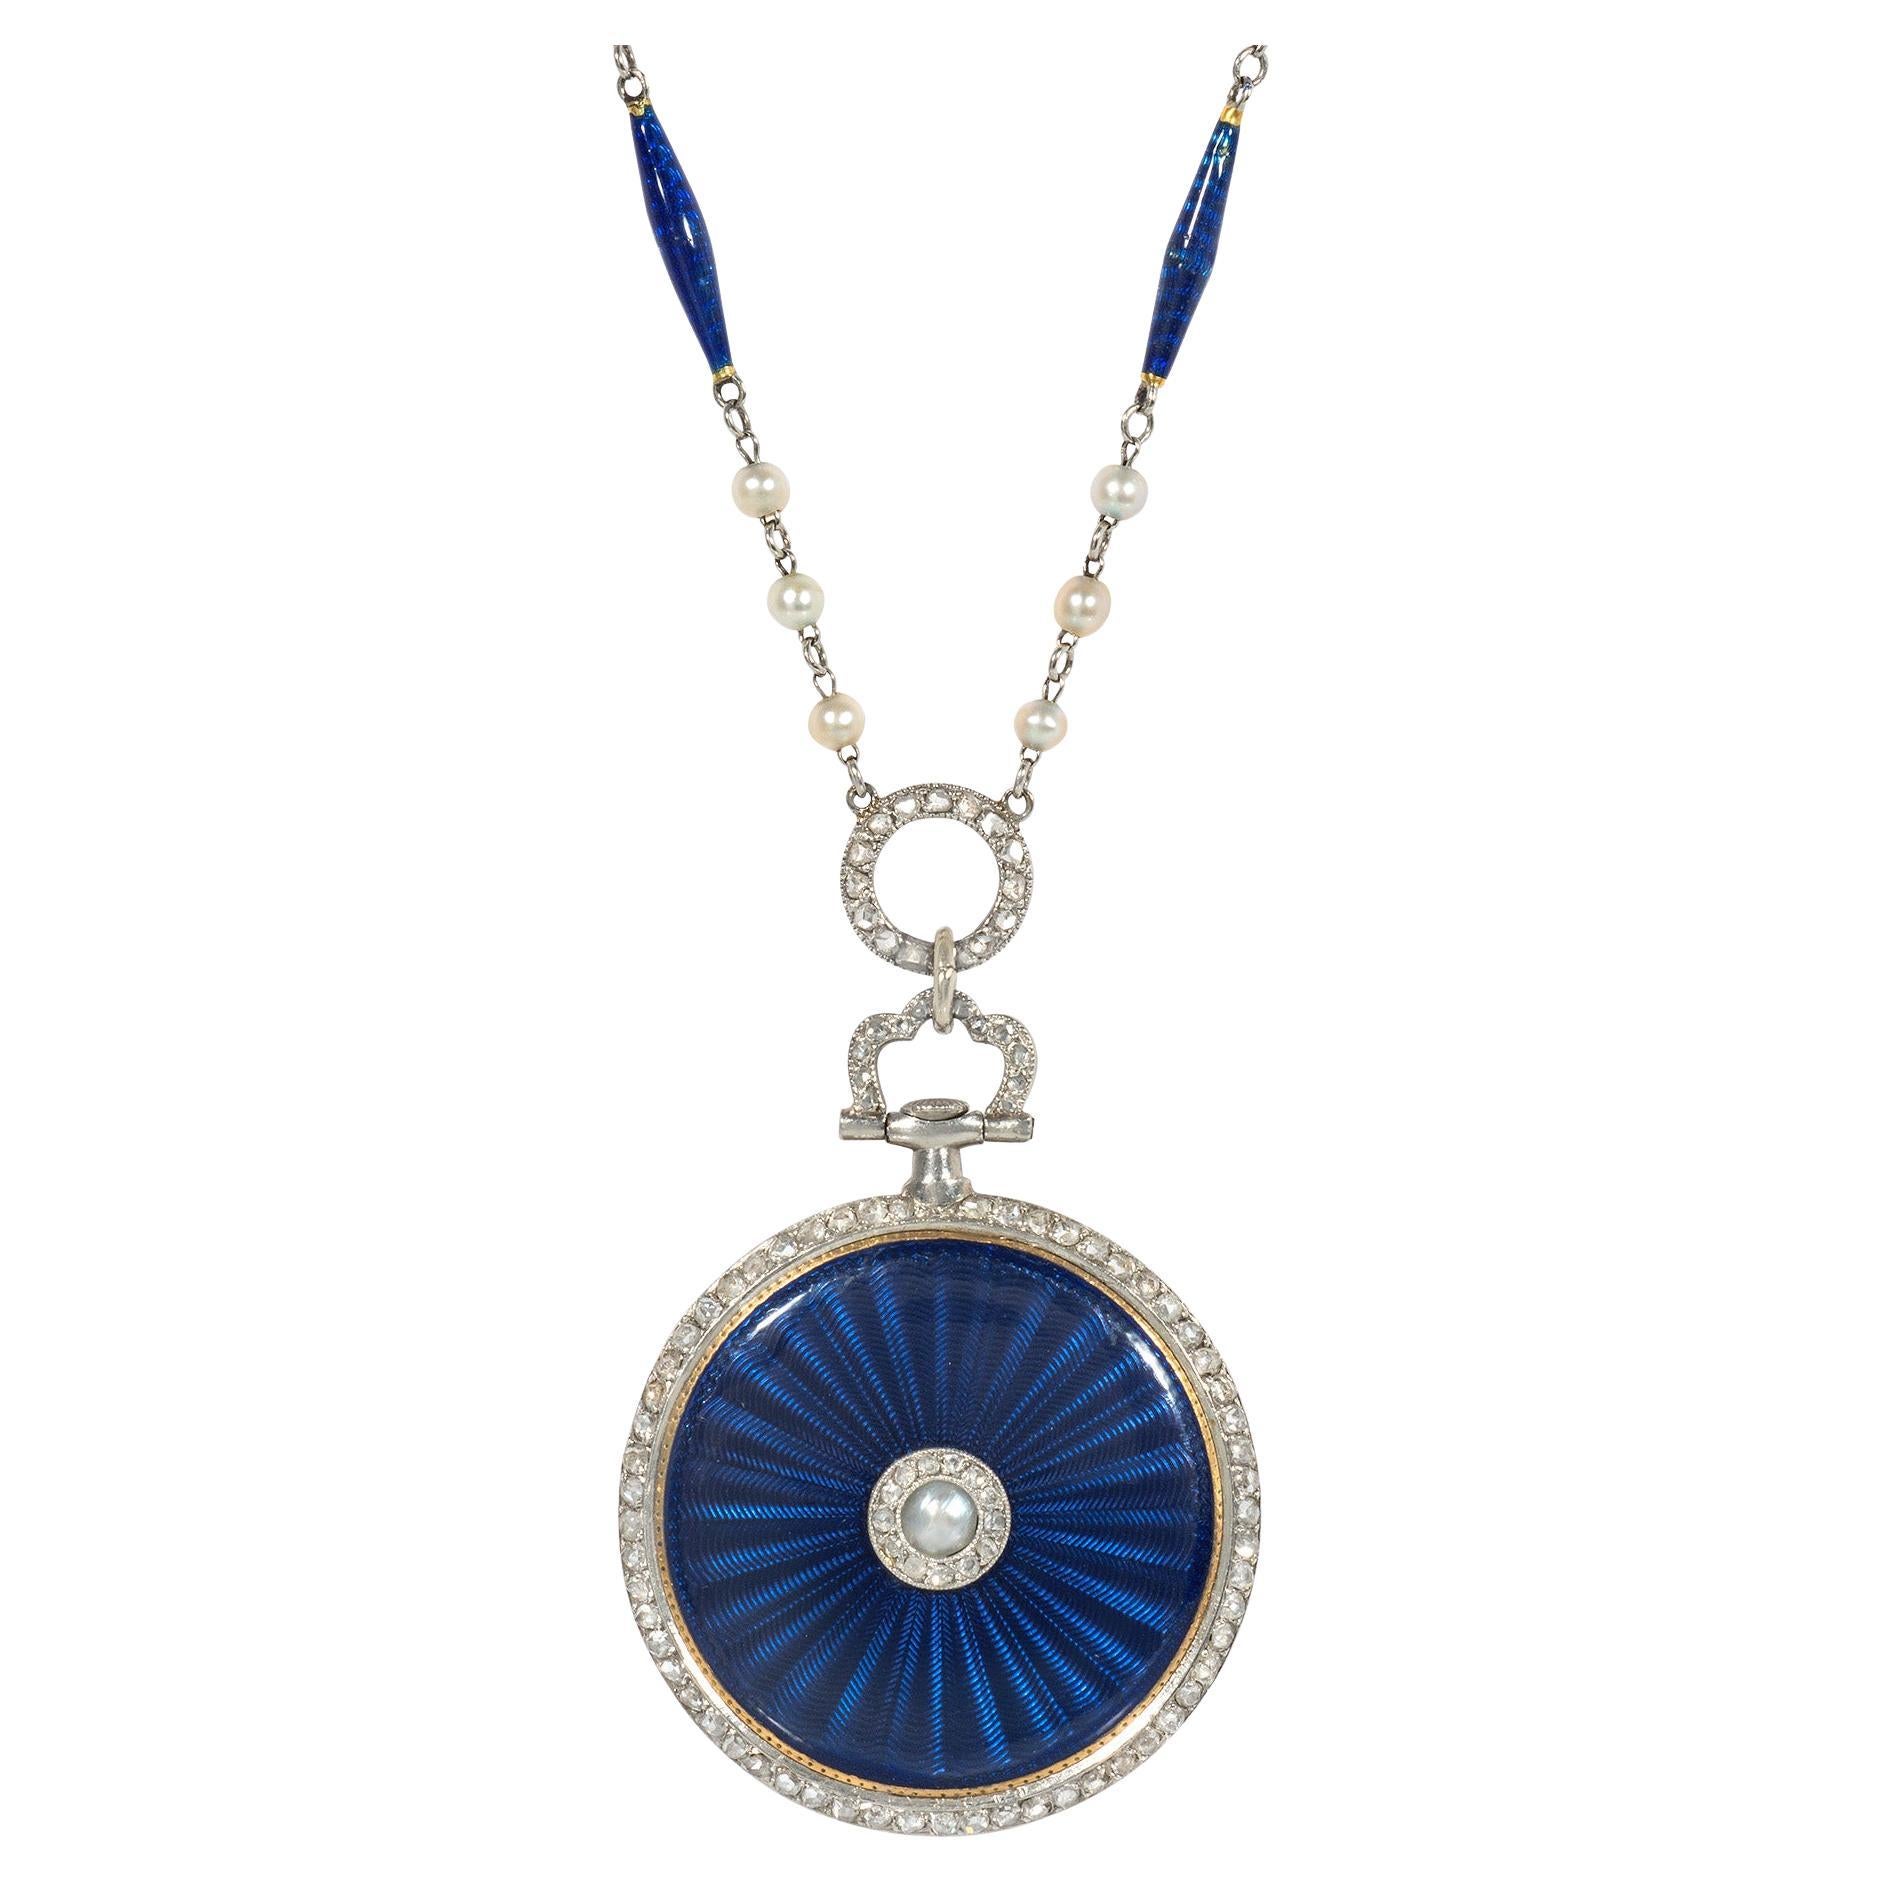 Cartier Belle Epoque Blue Enamel, Diamond, and Pearl Pendant Watch on Chain For Sale